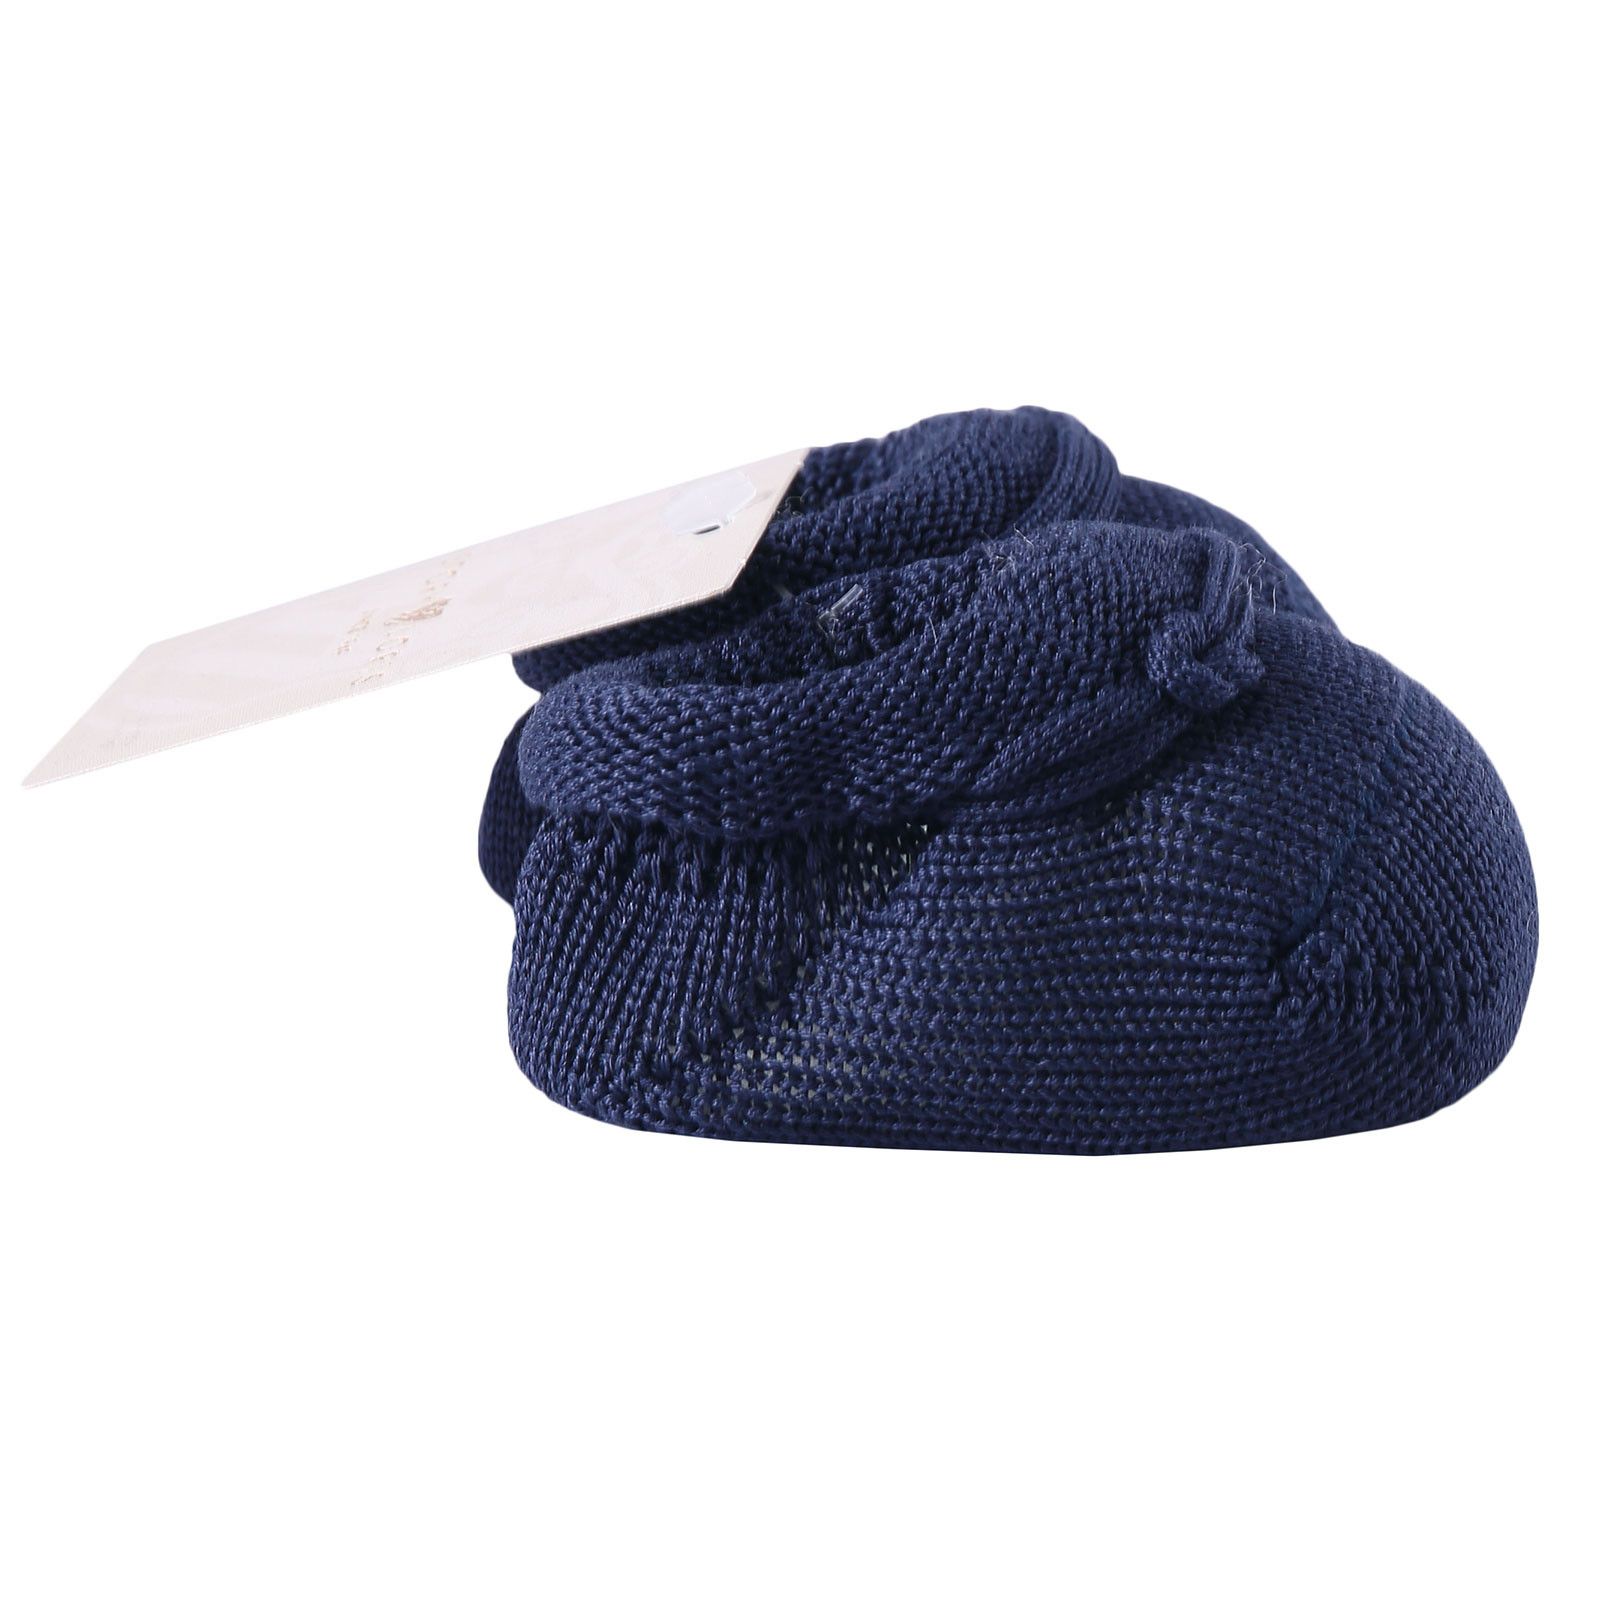 Baby Navy Blue Knitted Cotton Shoes - CÉMAROSE | Children's Fashion Store - 3